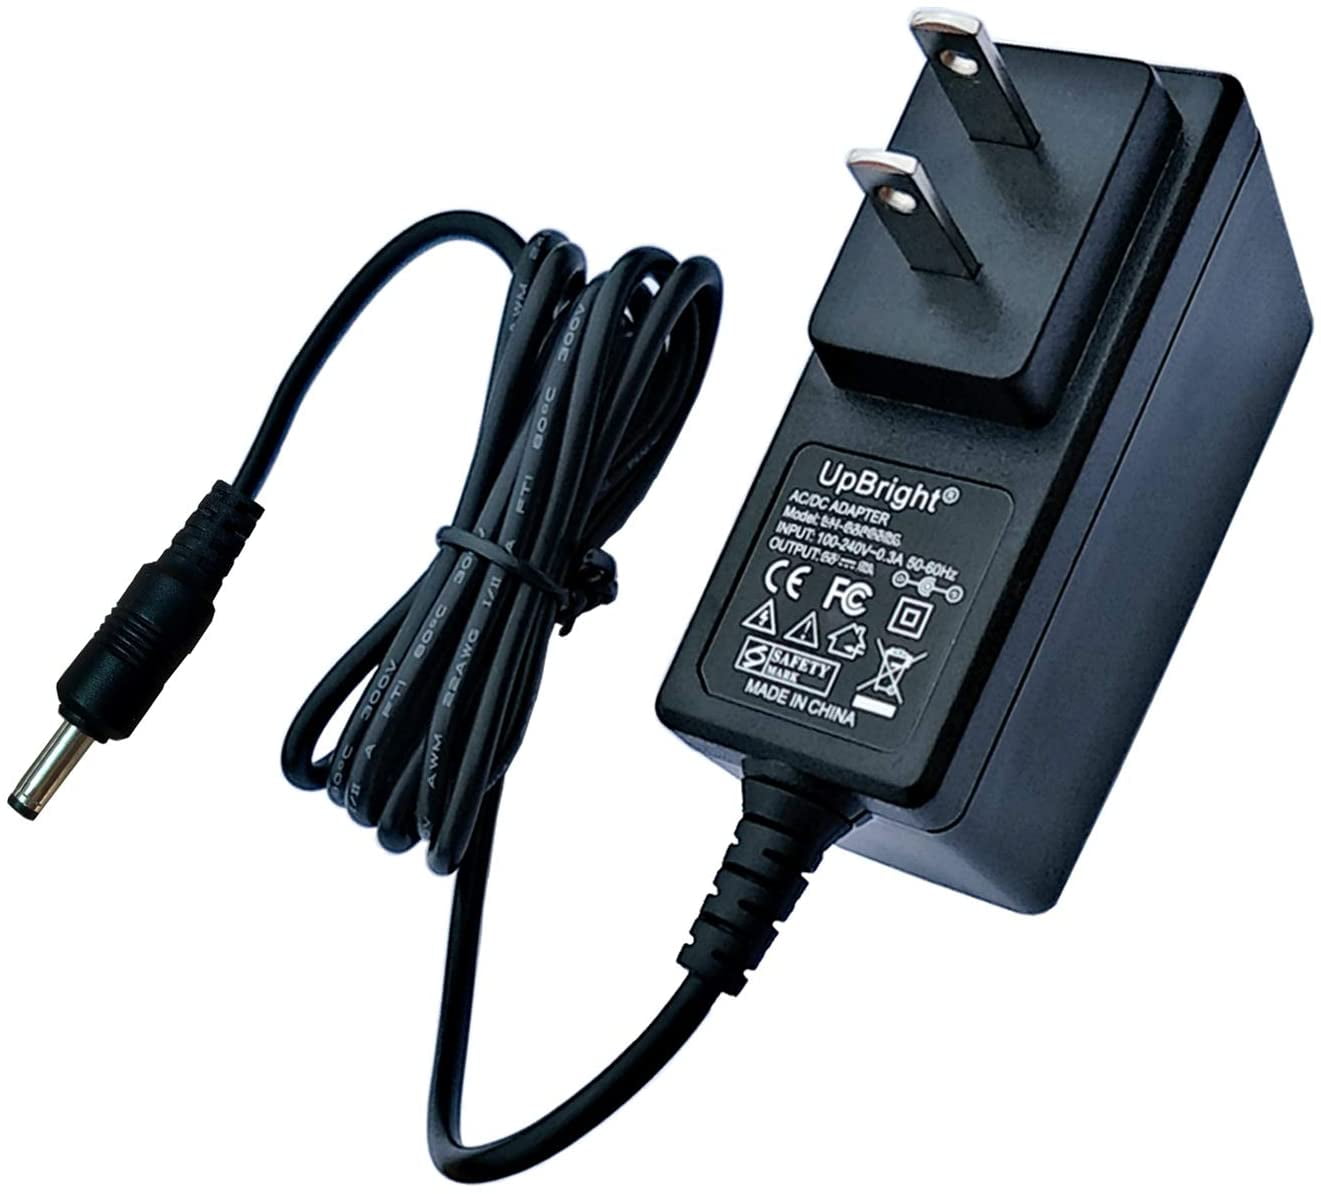 12V Car DC Adapter For Motorola Talkabout Distance DPS Radio Auto Power Charger 